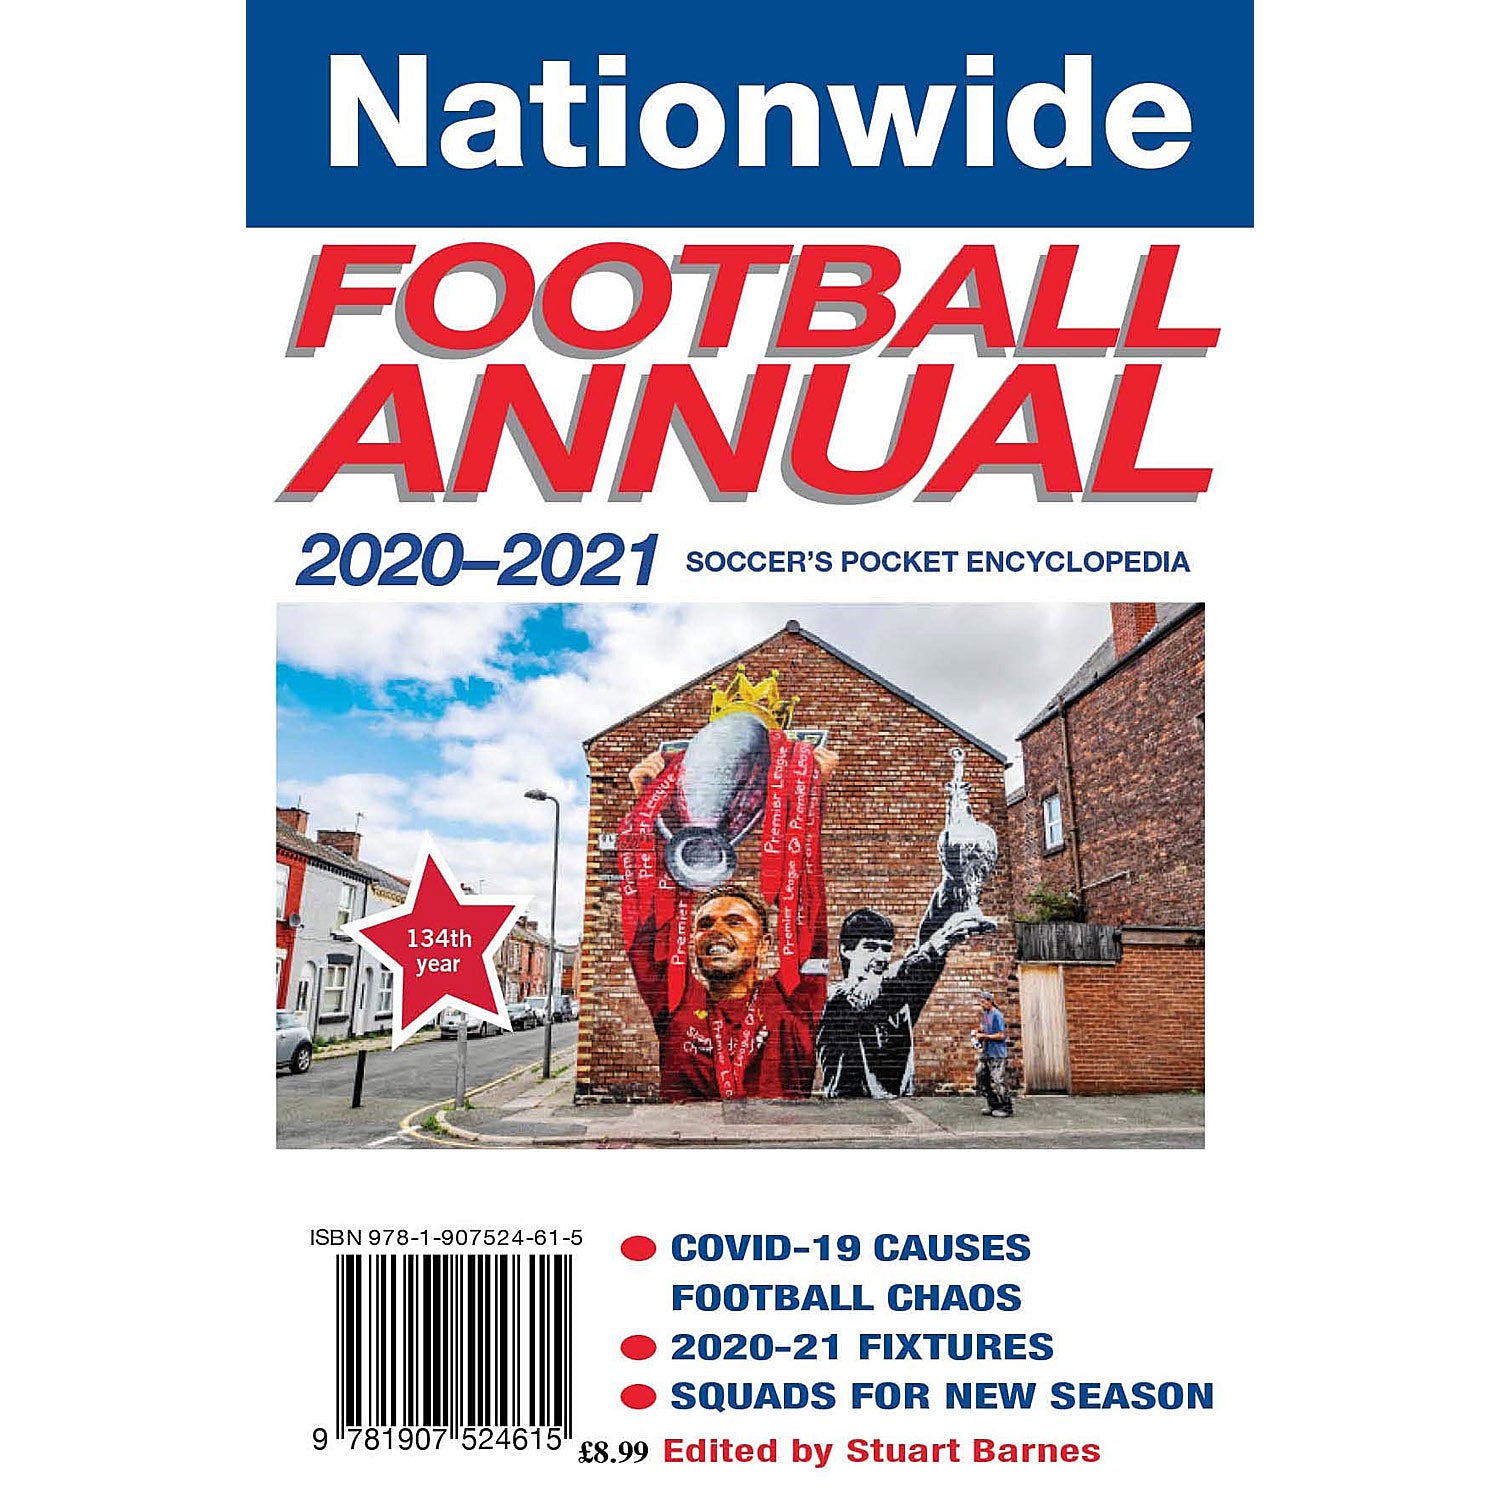 Nationwide Football Annual 2020-2021 (News of the World)